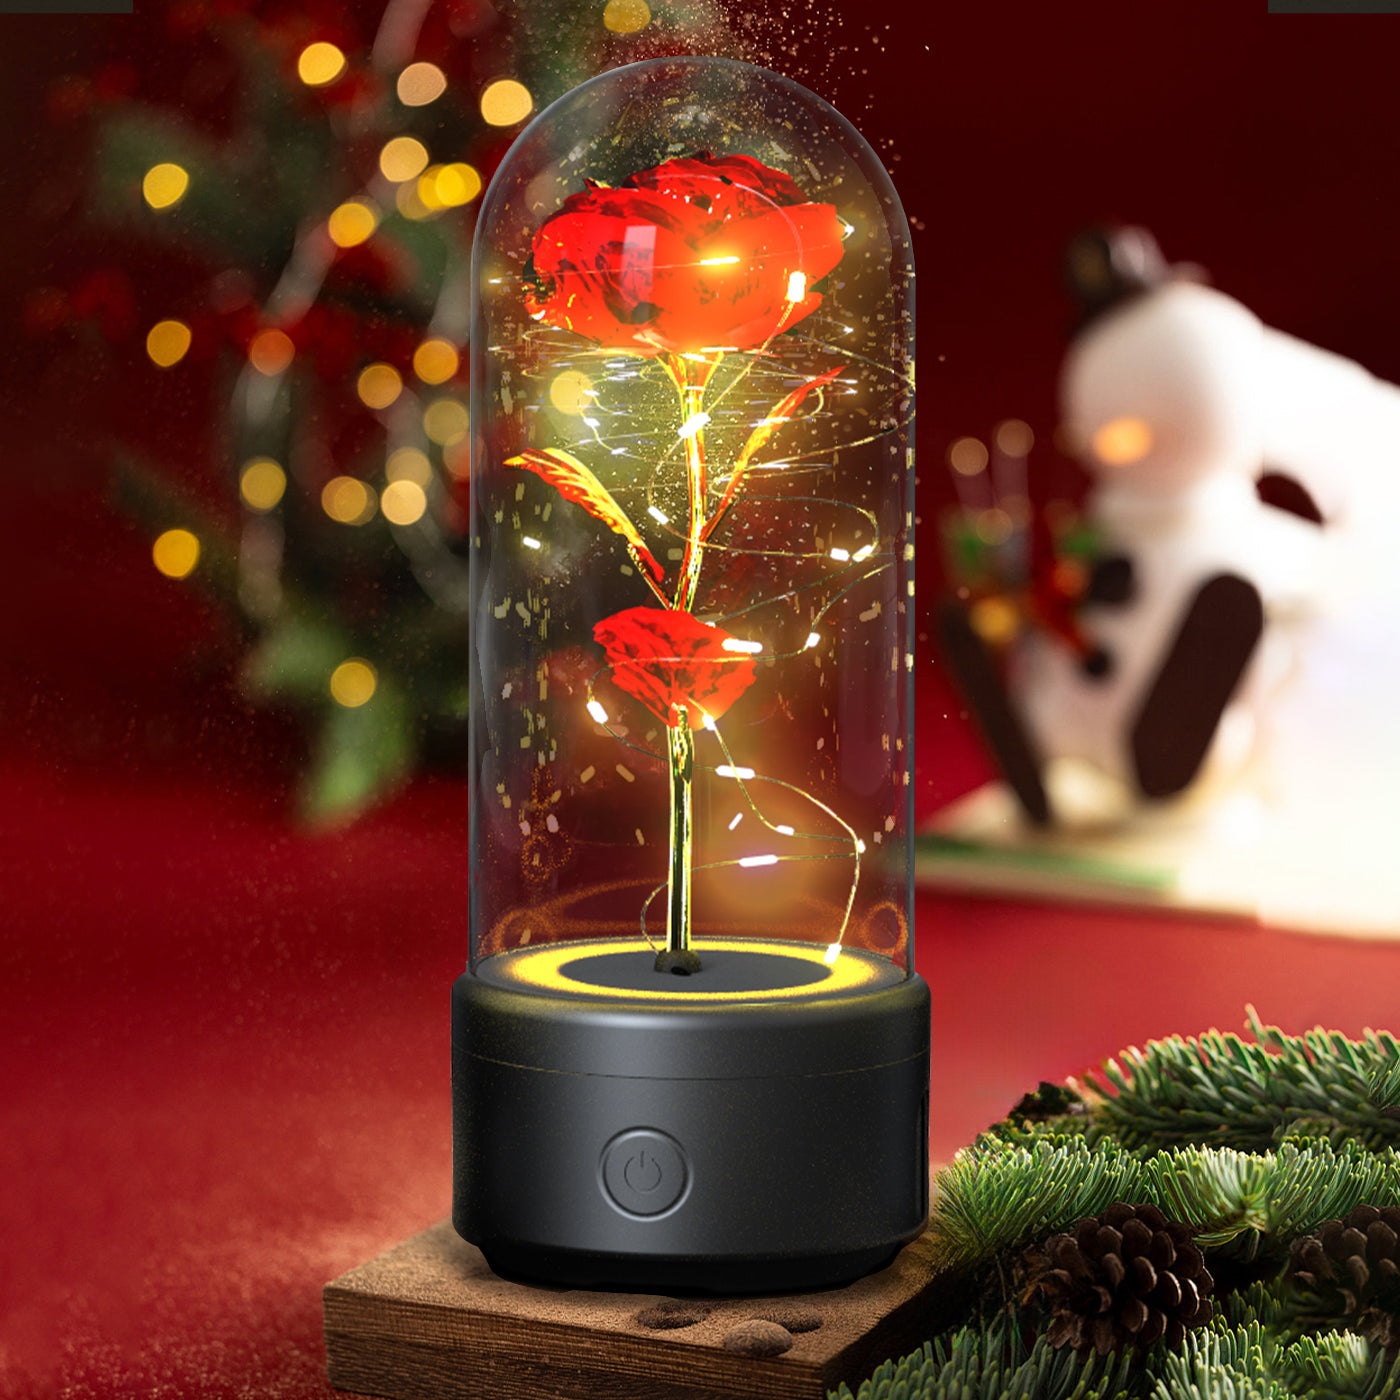 2-in-1 Rose Flowers LED Light and Bluetooth Speaker - A Unique Valentine's Day and Mother's Day Gift